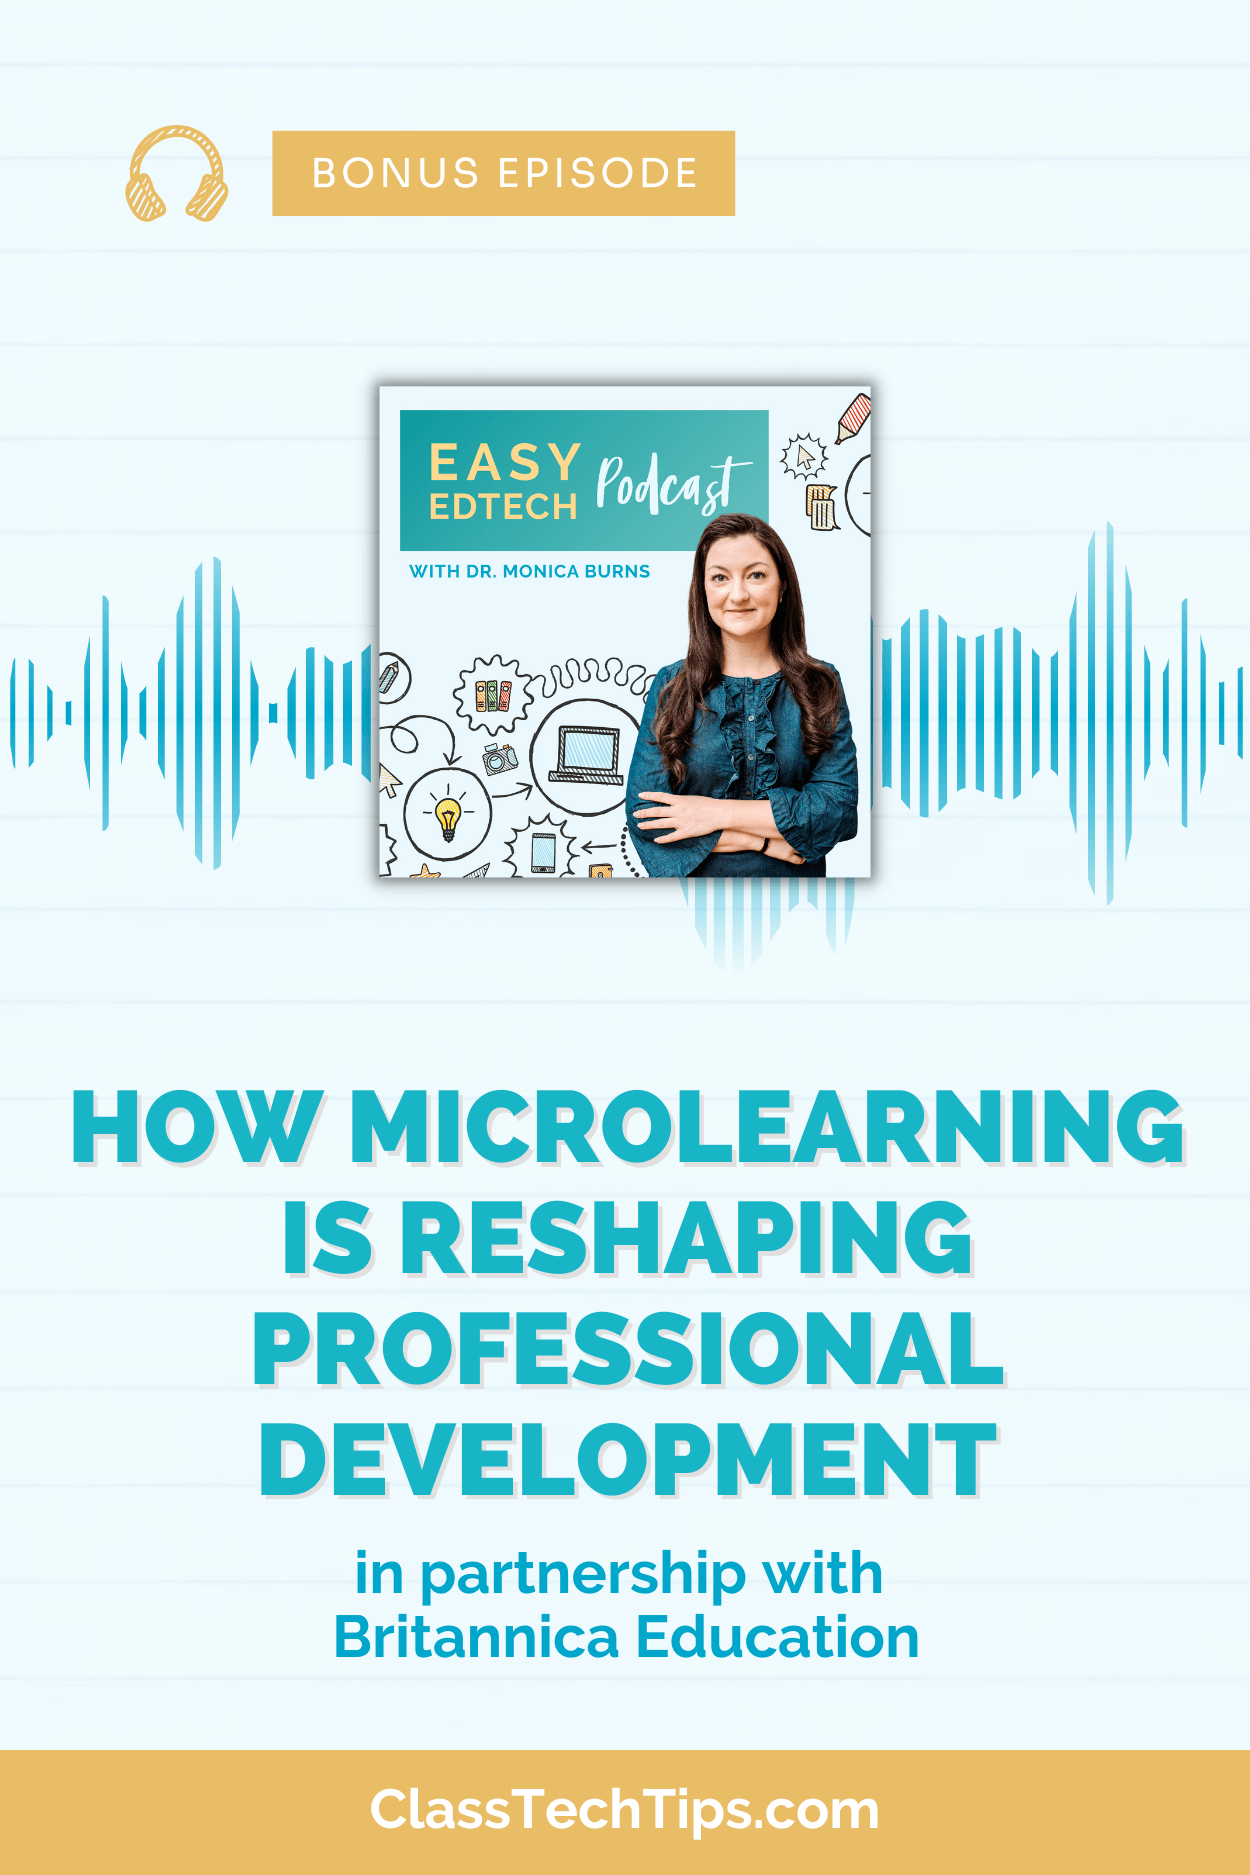 his is an image of the podcast logo centered on a backdrop of vibrant blue soundwaves, resonating the sound theme of the podcast. The title 'How Microlearning is Reshaping Professional Development' is visibly displayed, demonstrating the topic of the episode. It suggests an engaging audio discussion about contemporary learning methods in professional development.